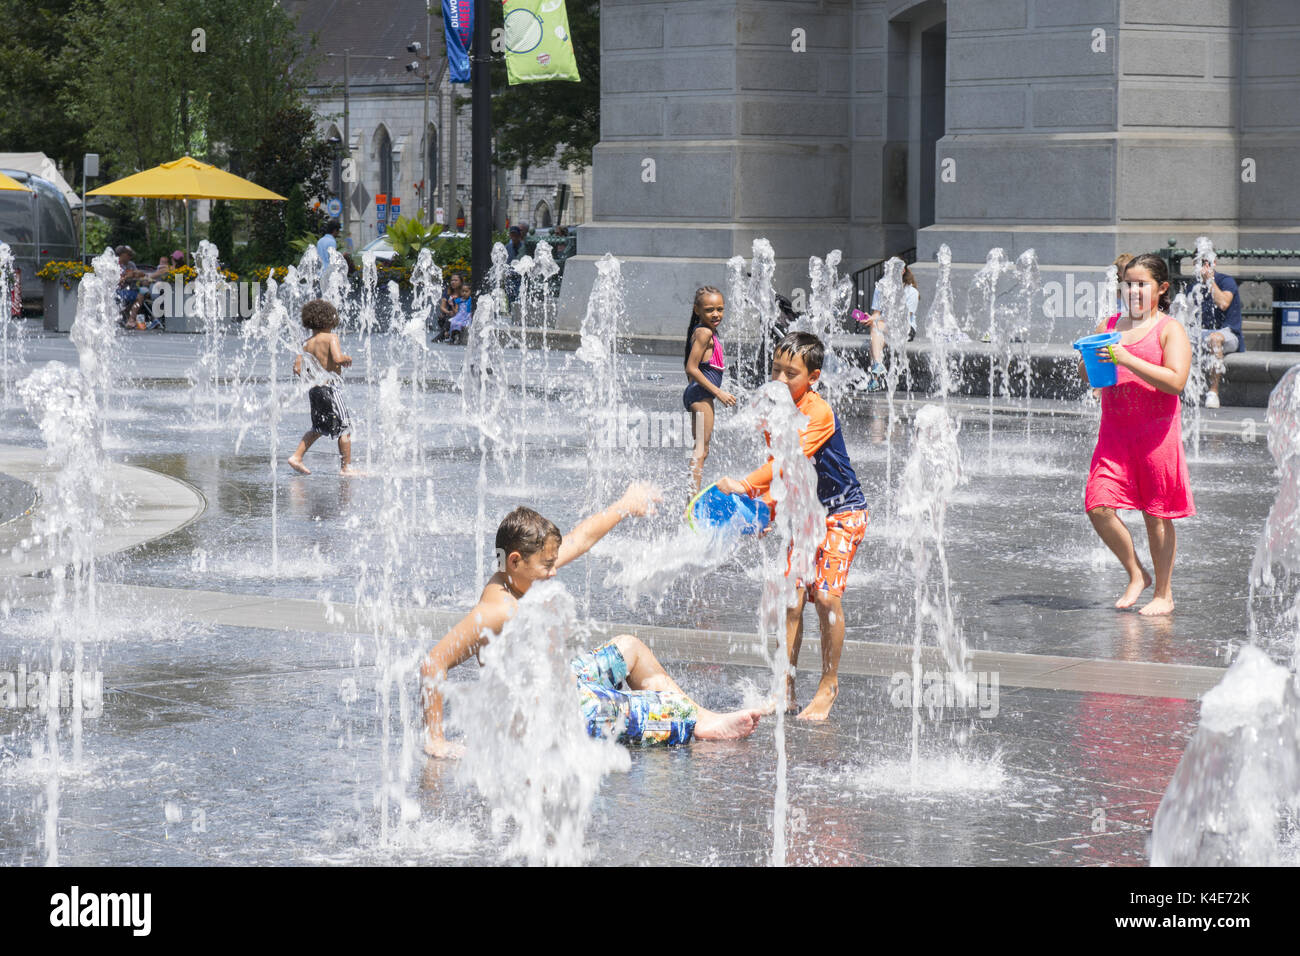 children-play-in-the-synchronized-water-fountains-at-the-city-hall-K4E72K.jpg